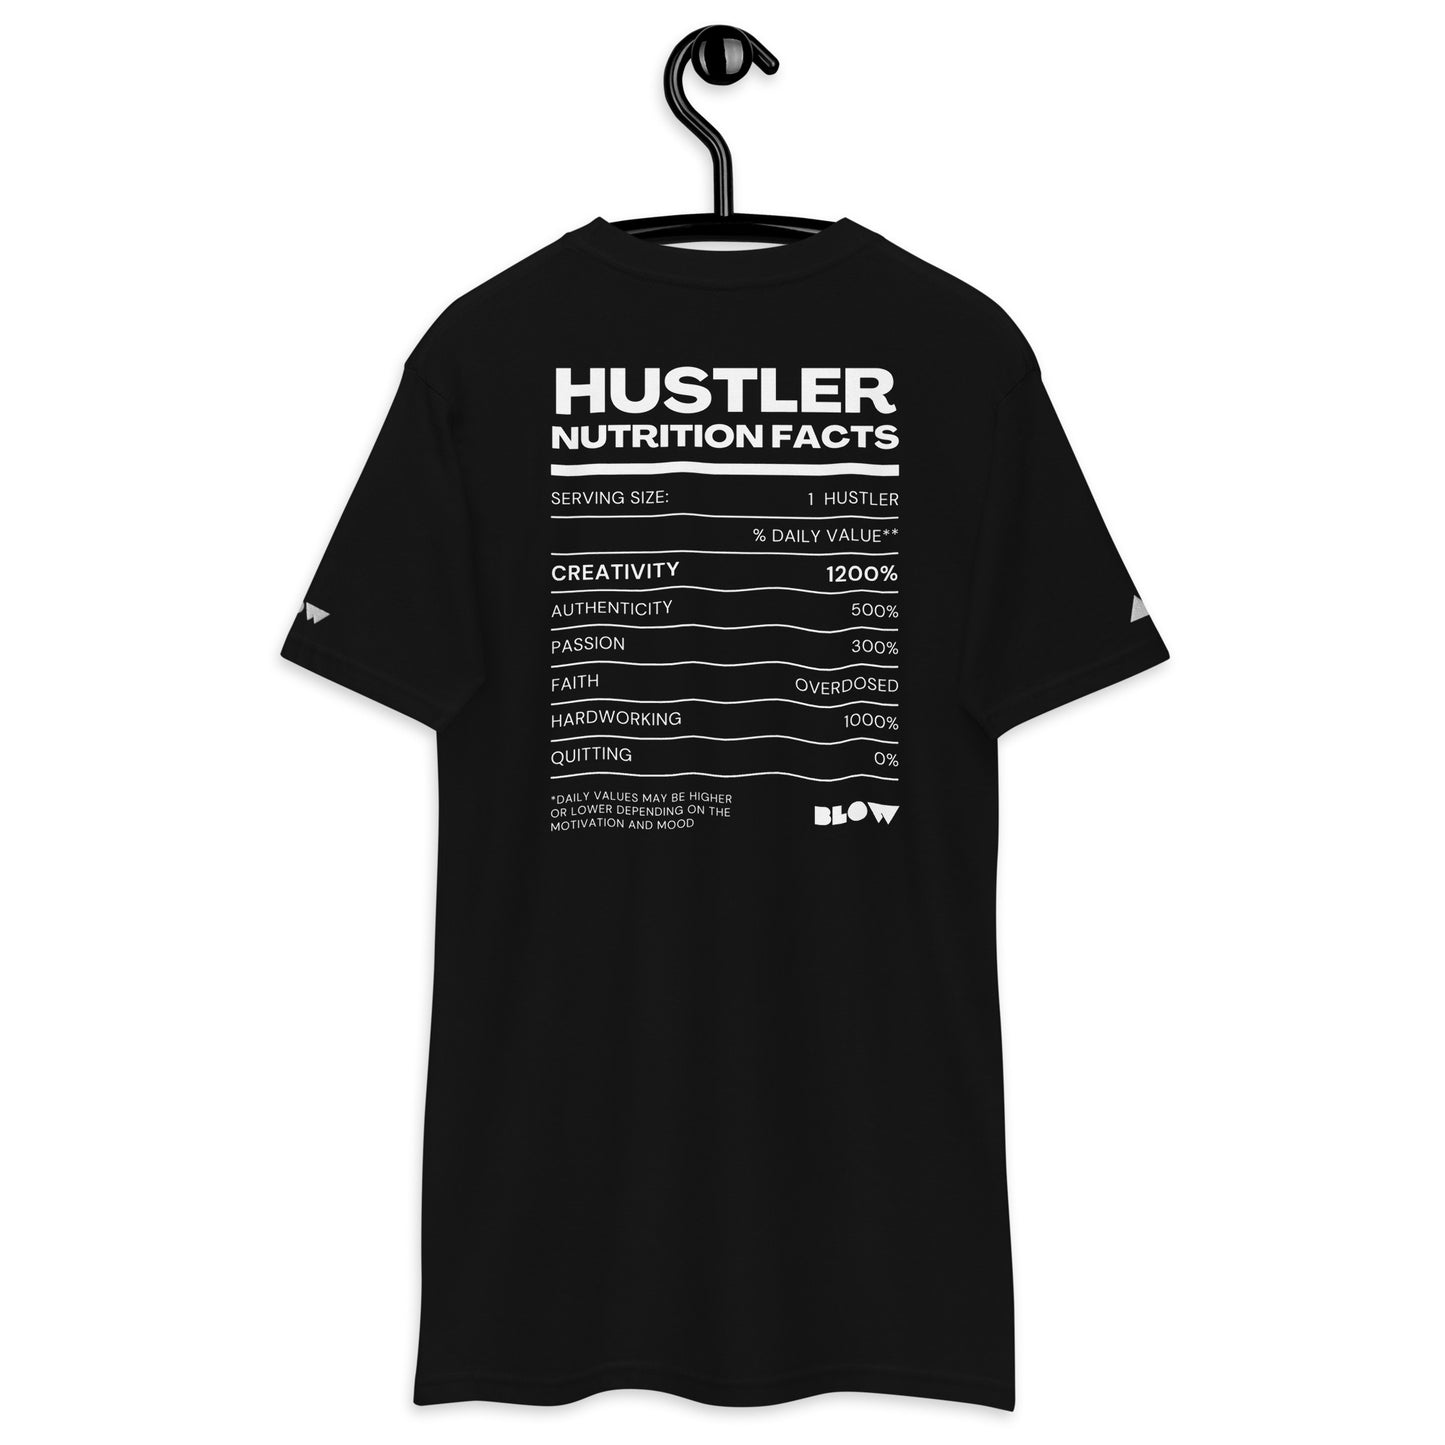 BLOW | LIMITED EDITION | HUSTLERS NUTRITIONAL FACTS | EMBROIDERED PREMIUM HEAVYWEIGHT T-SHIRT